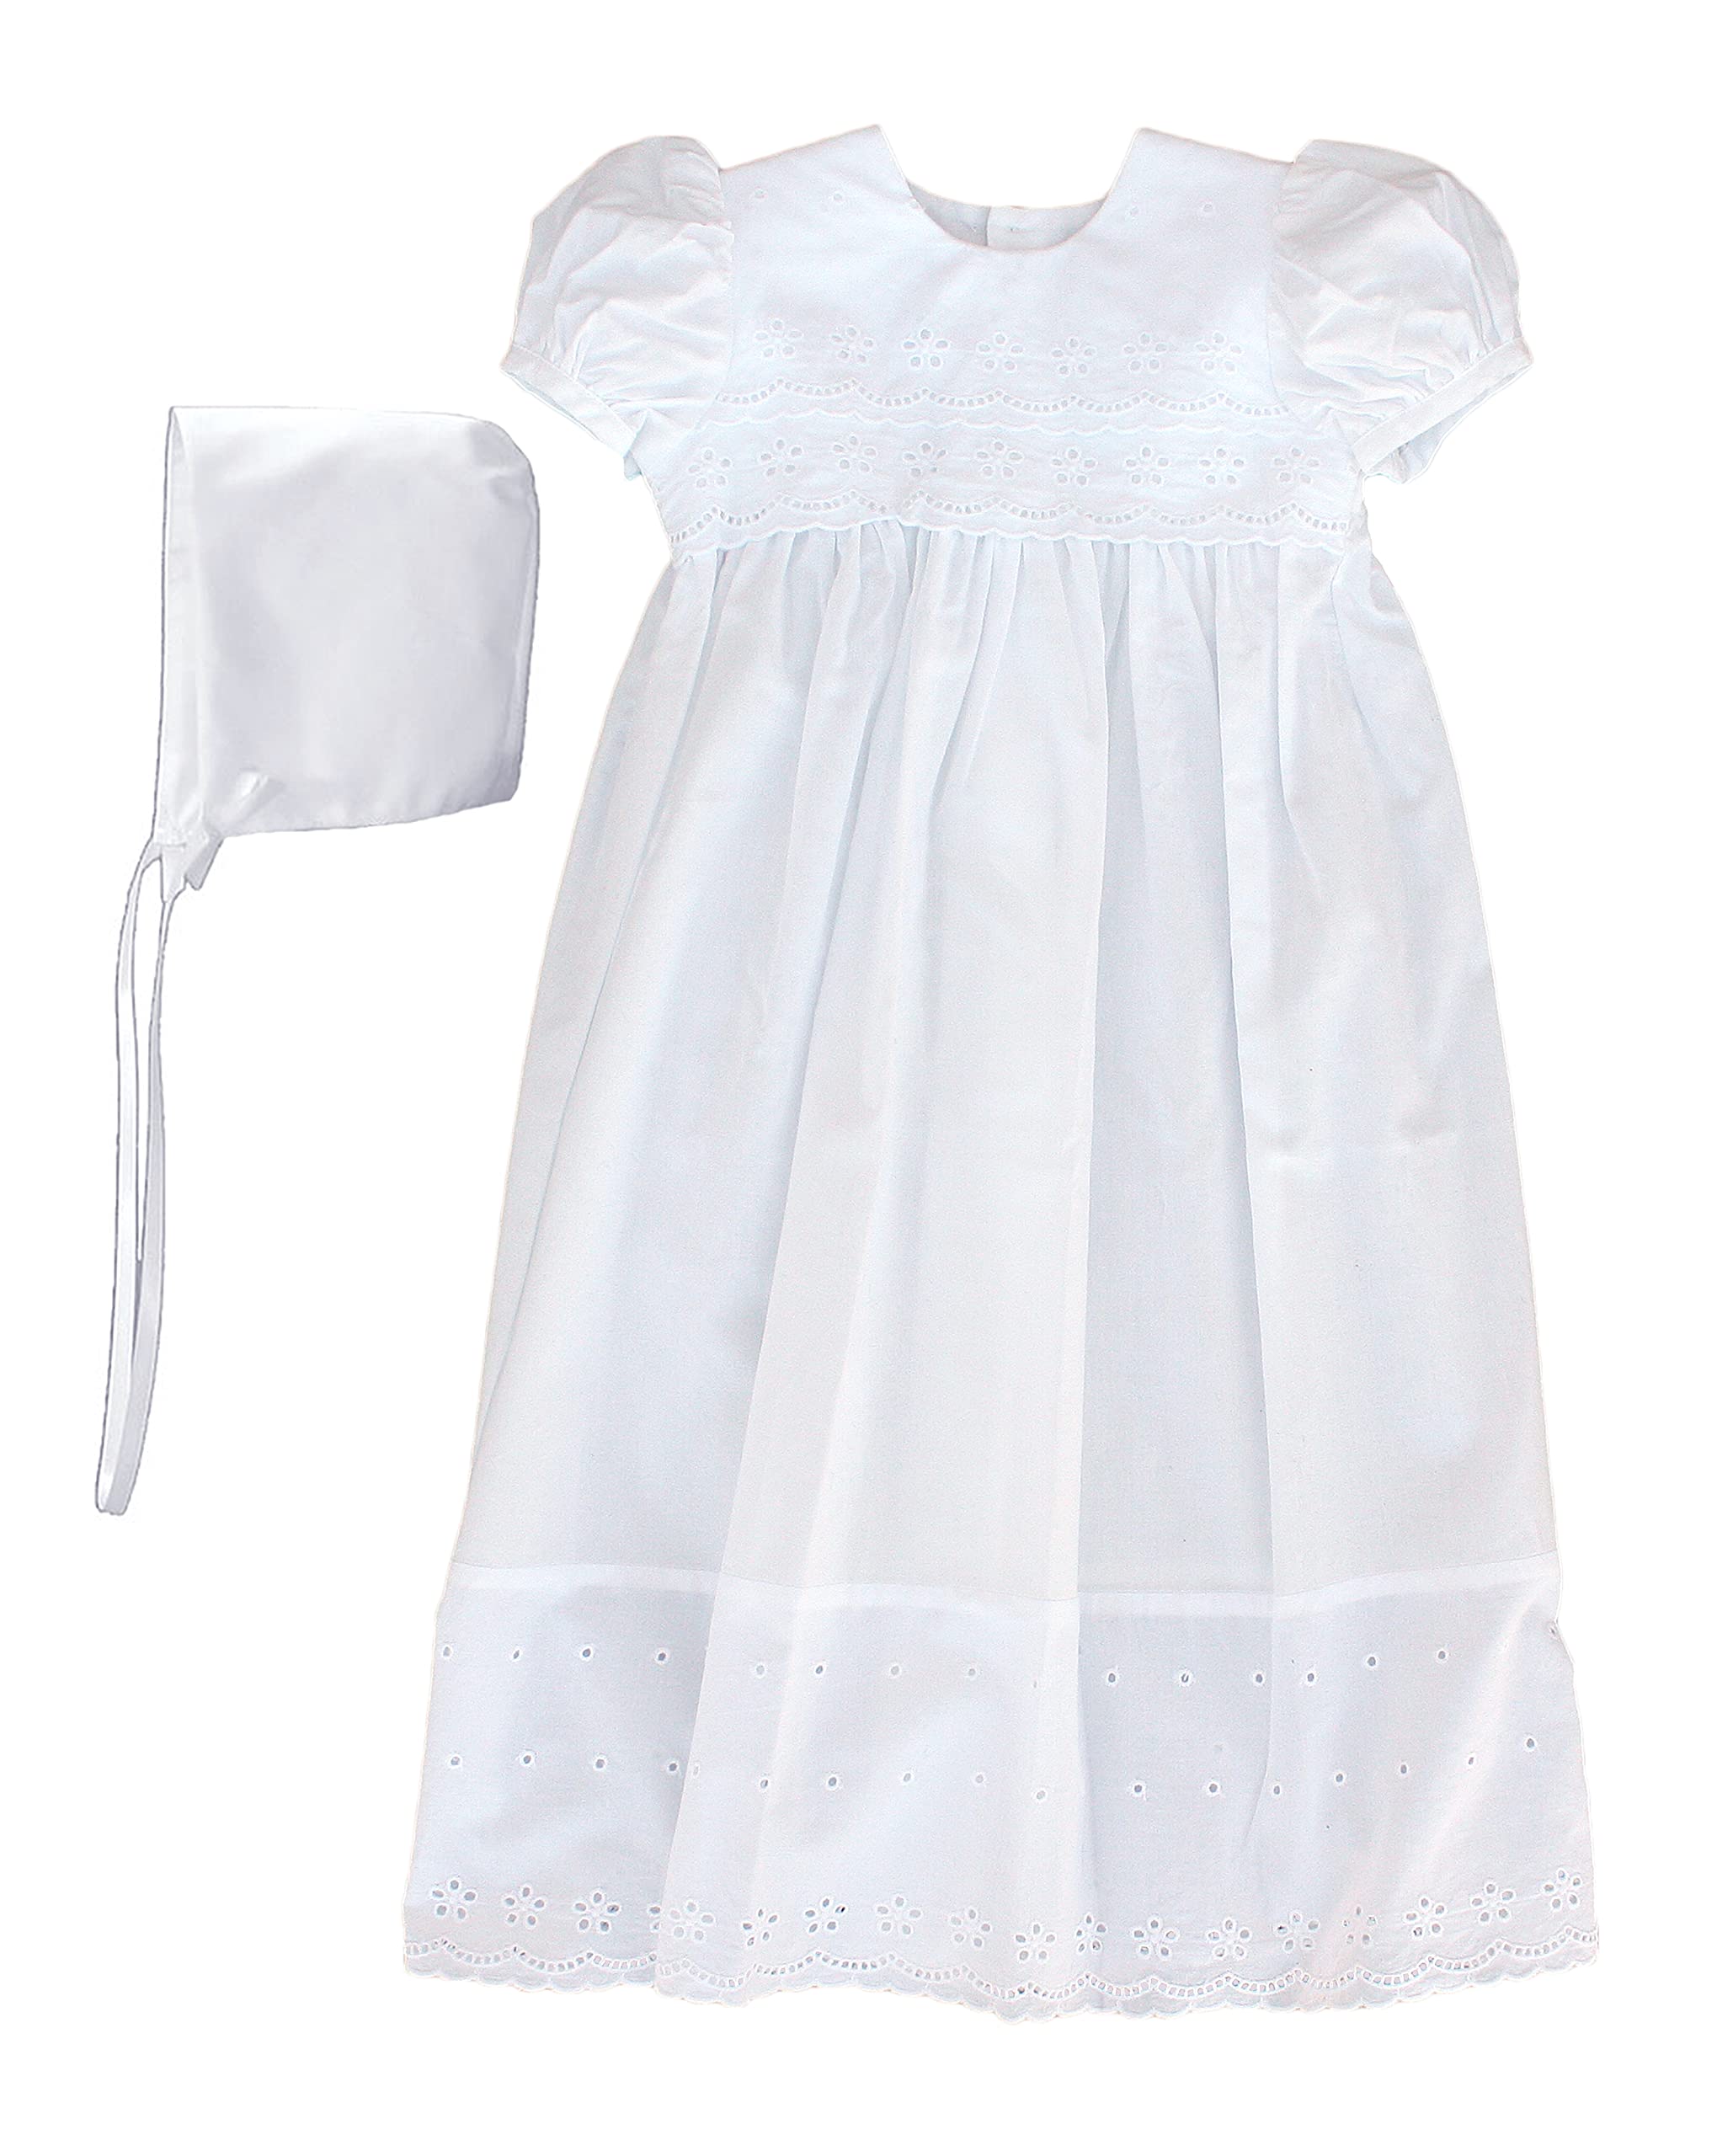 White Cotton Christening Baptism Gown with Lace Border with Bonnet